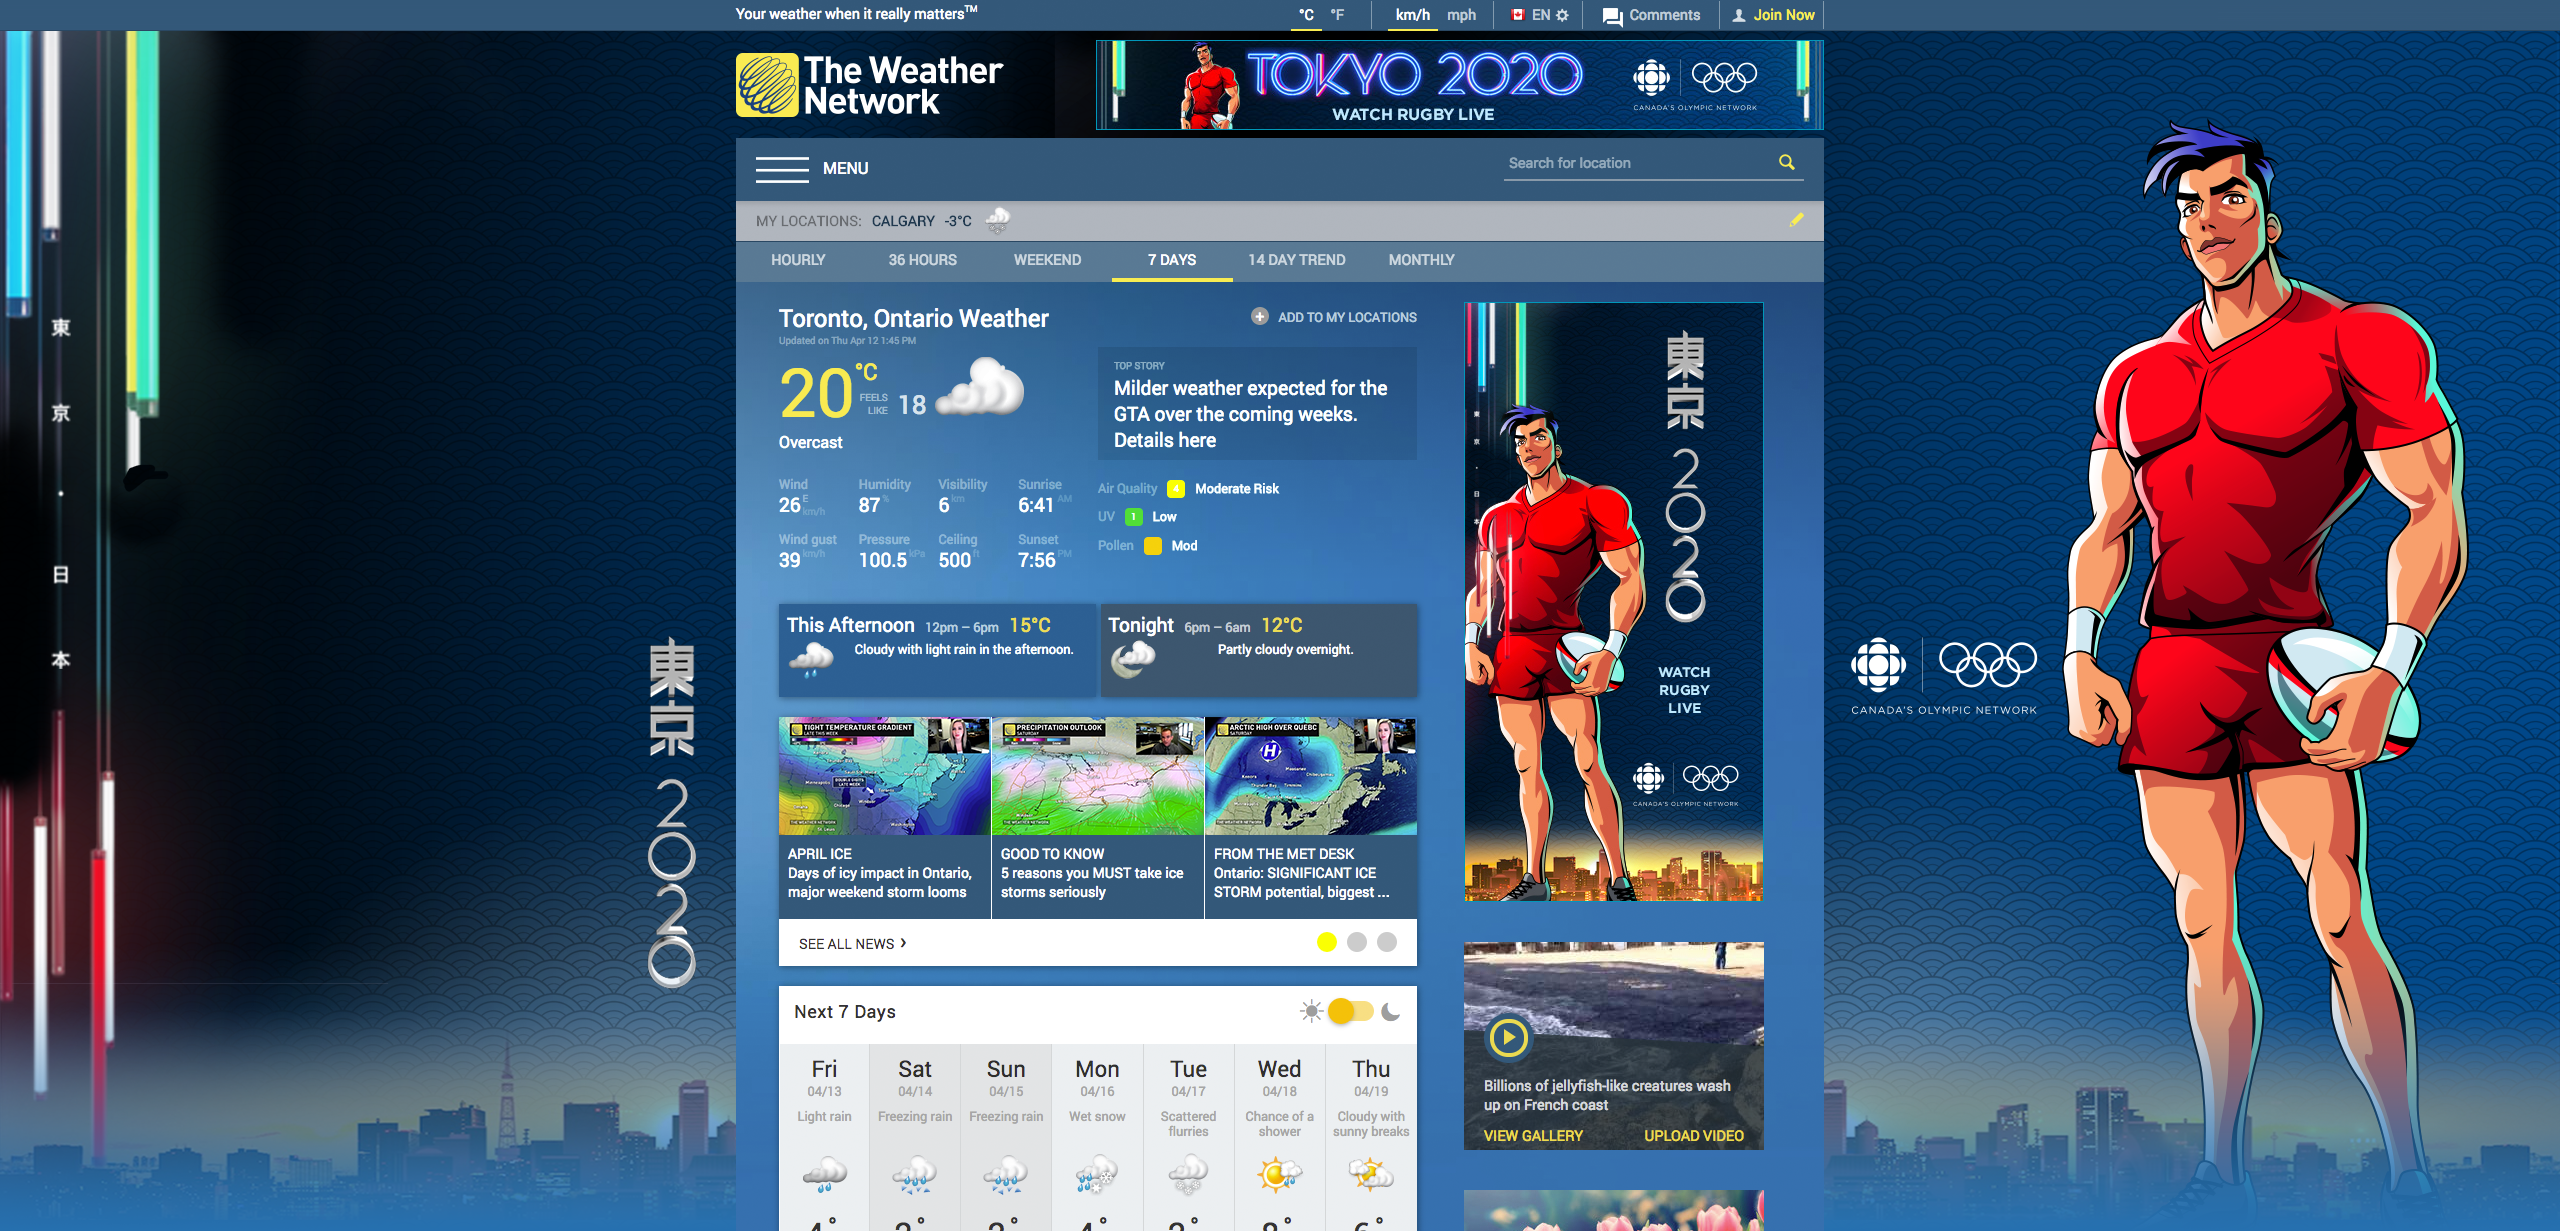 A homepage takeover skin with an anime-style illustration of a rugby player against a blue scalloped Japanese background with the Tokyo skyline along the bottom.